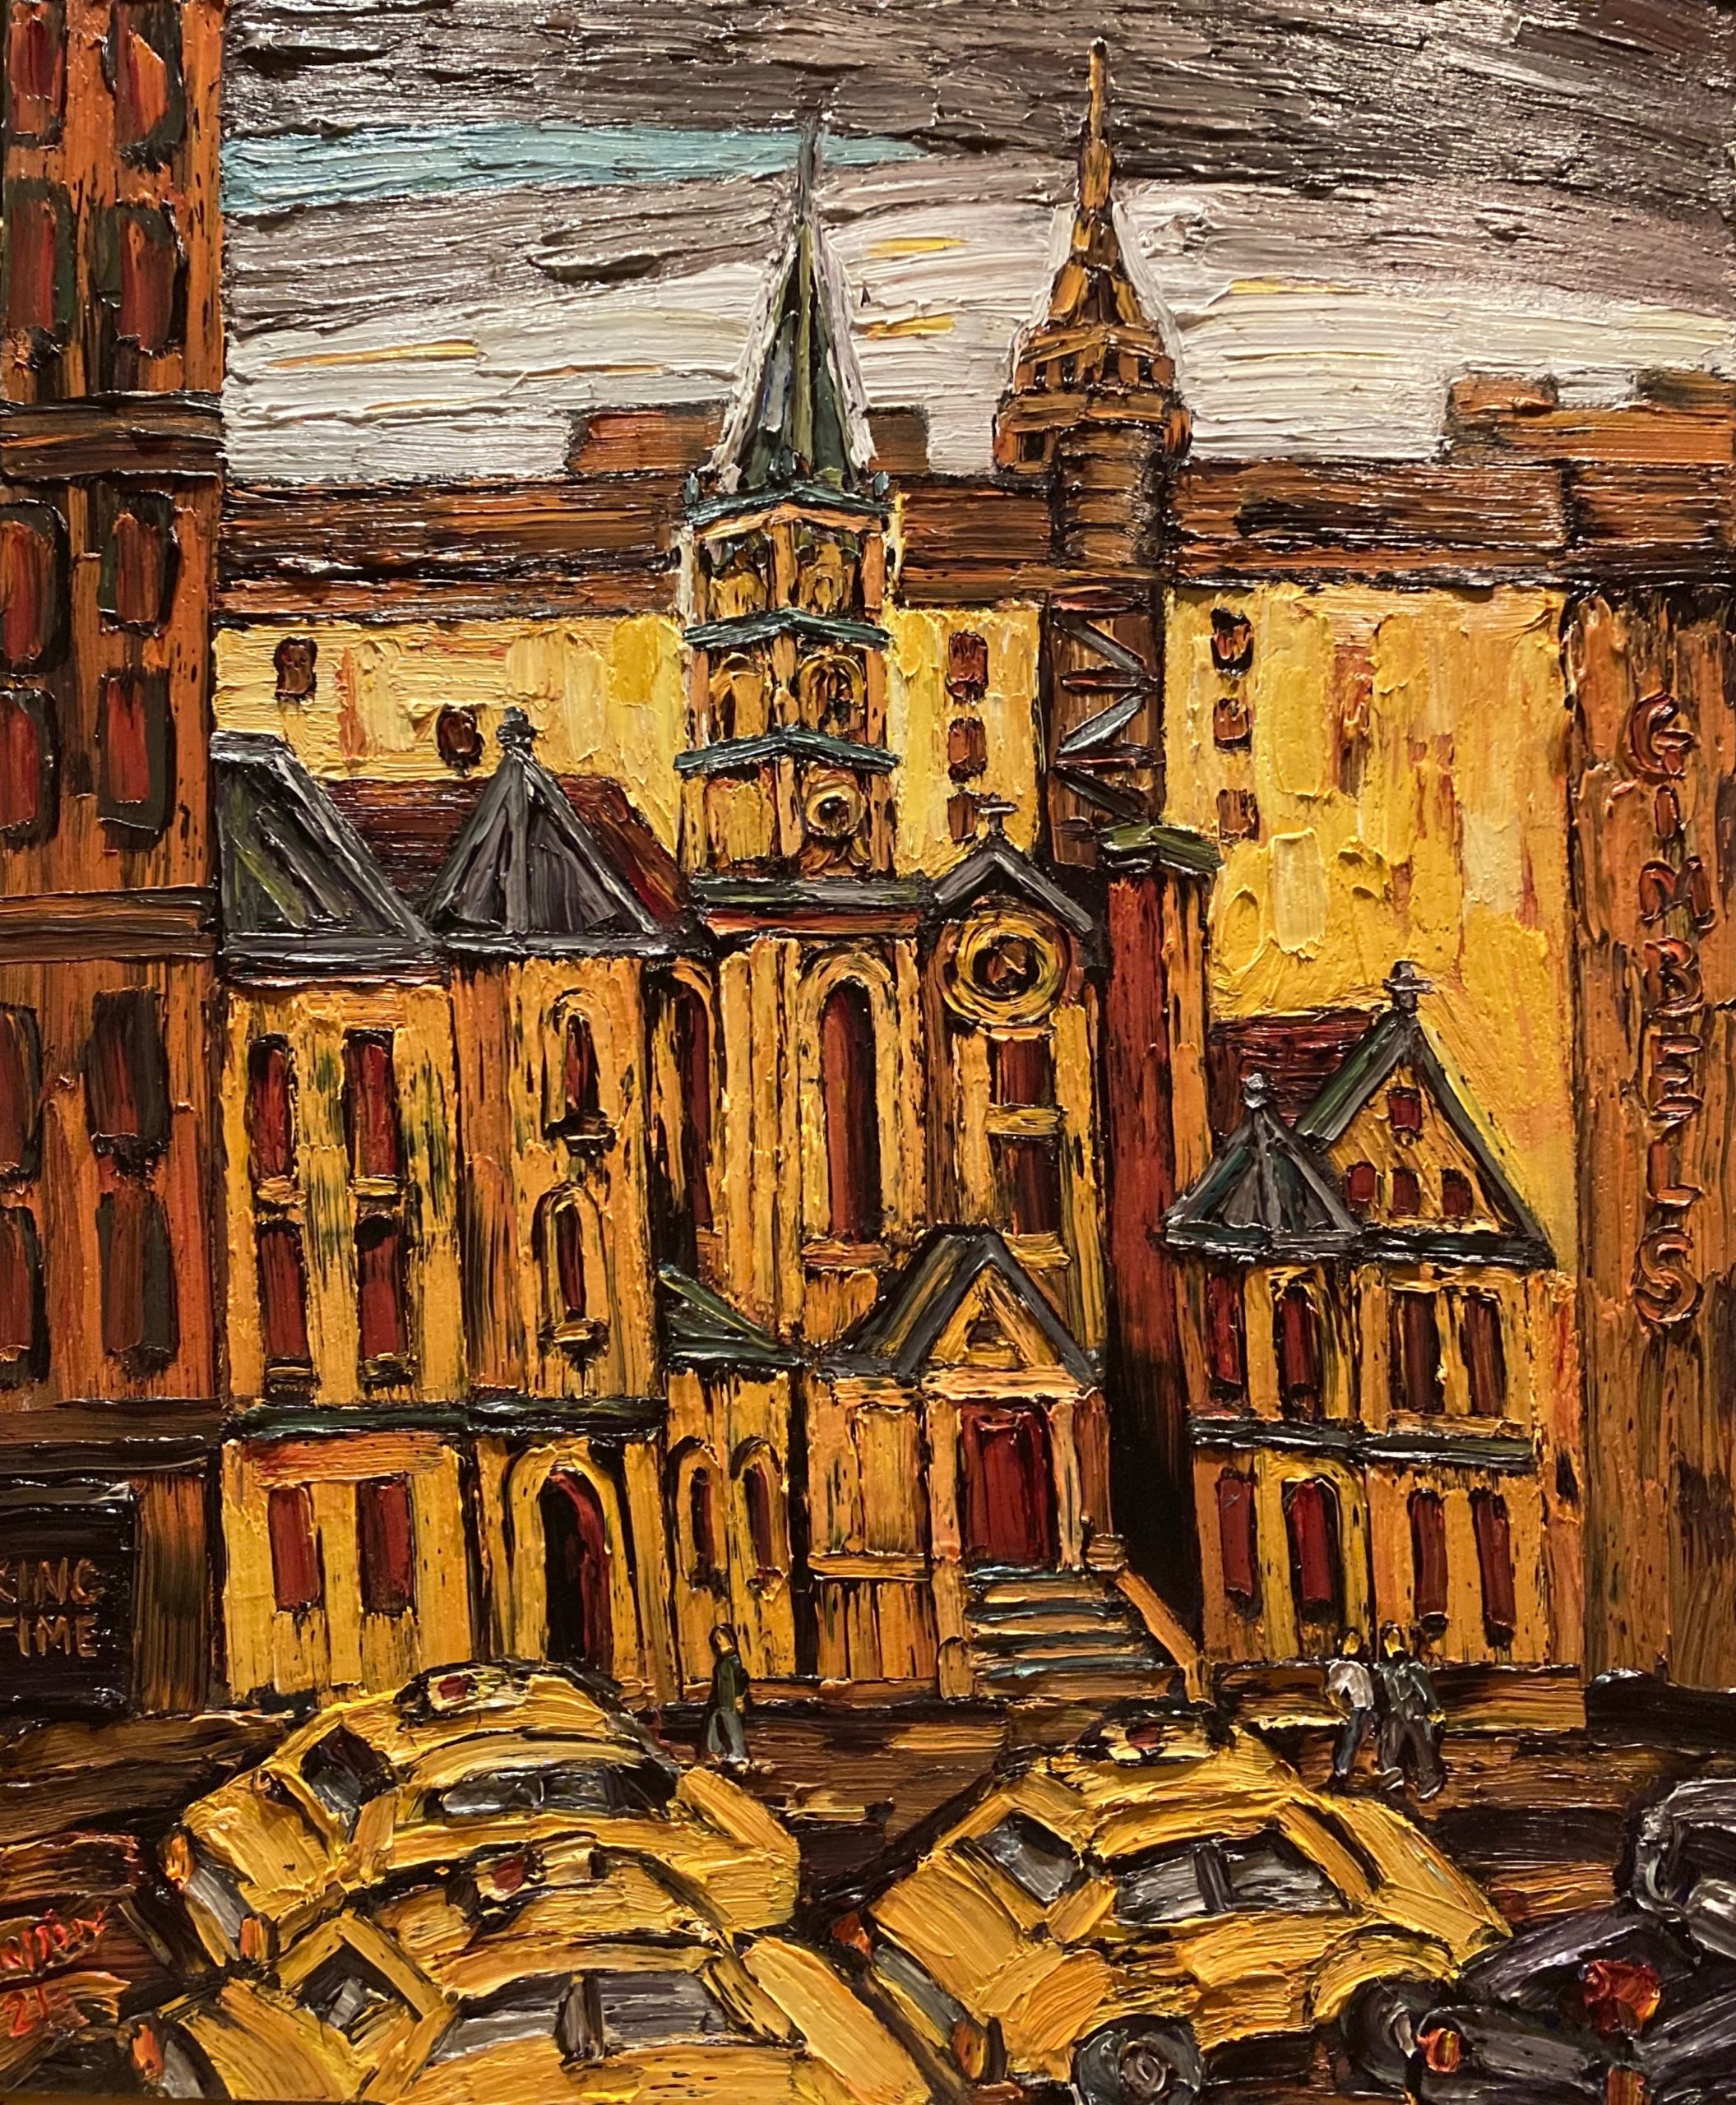 West 31st Street (St. Francis of Assisi Church). Oil on canvas, 36” x 30”.